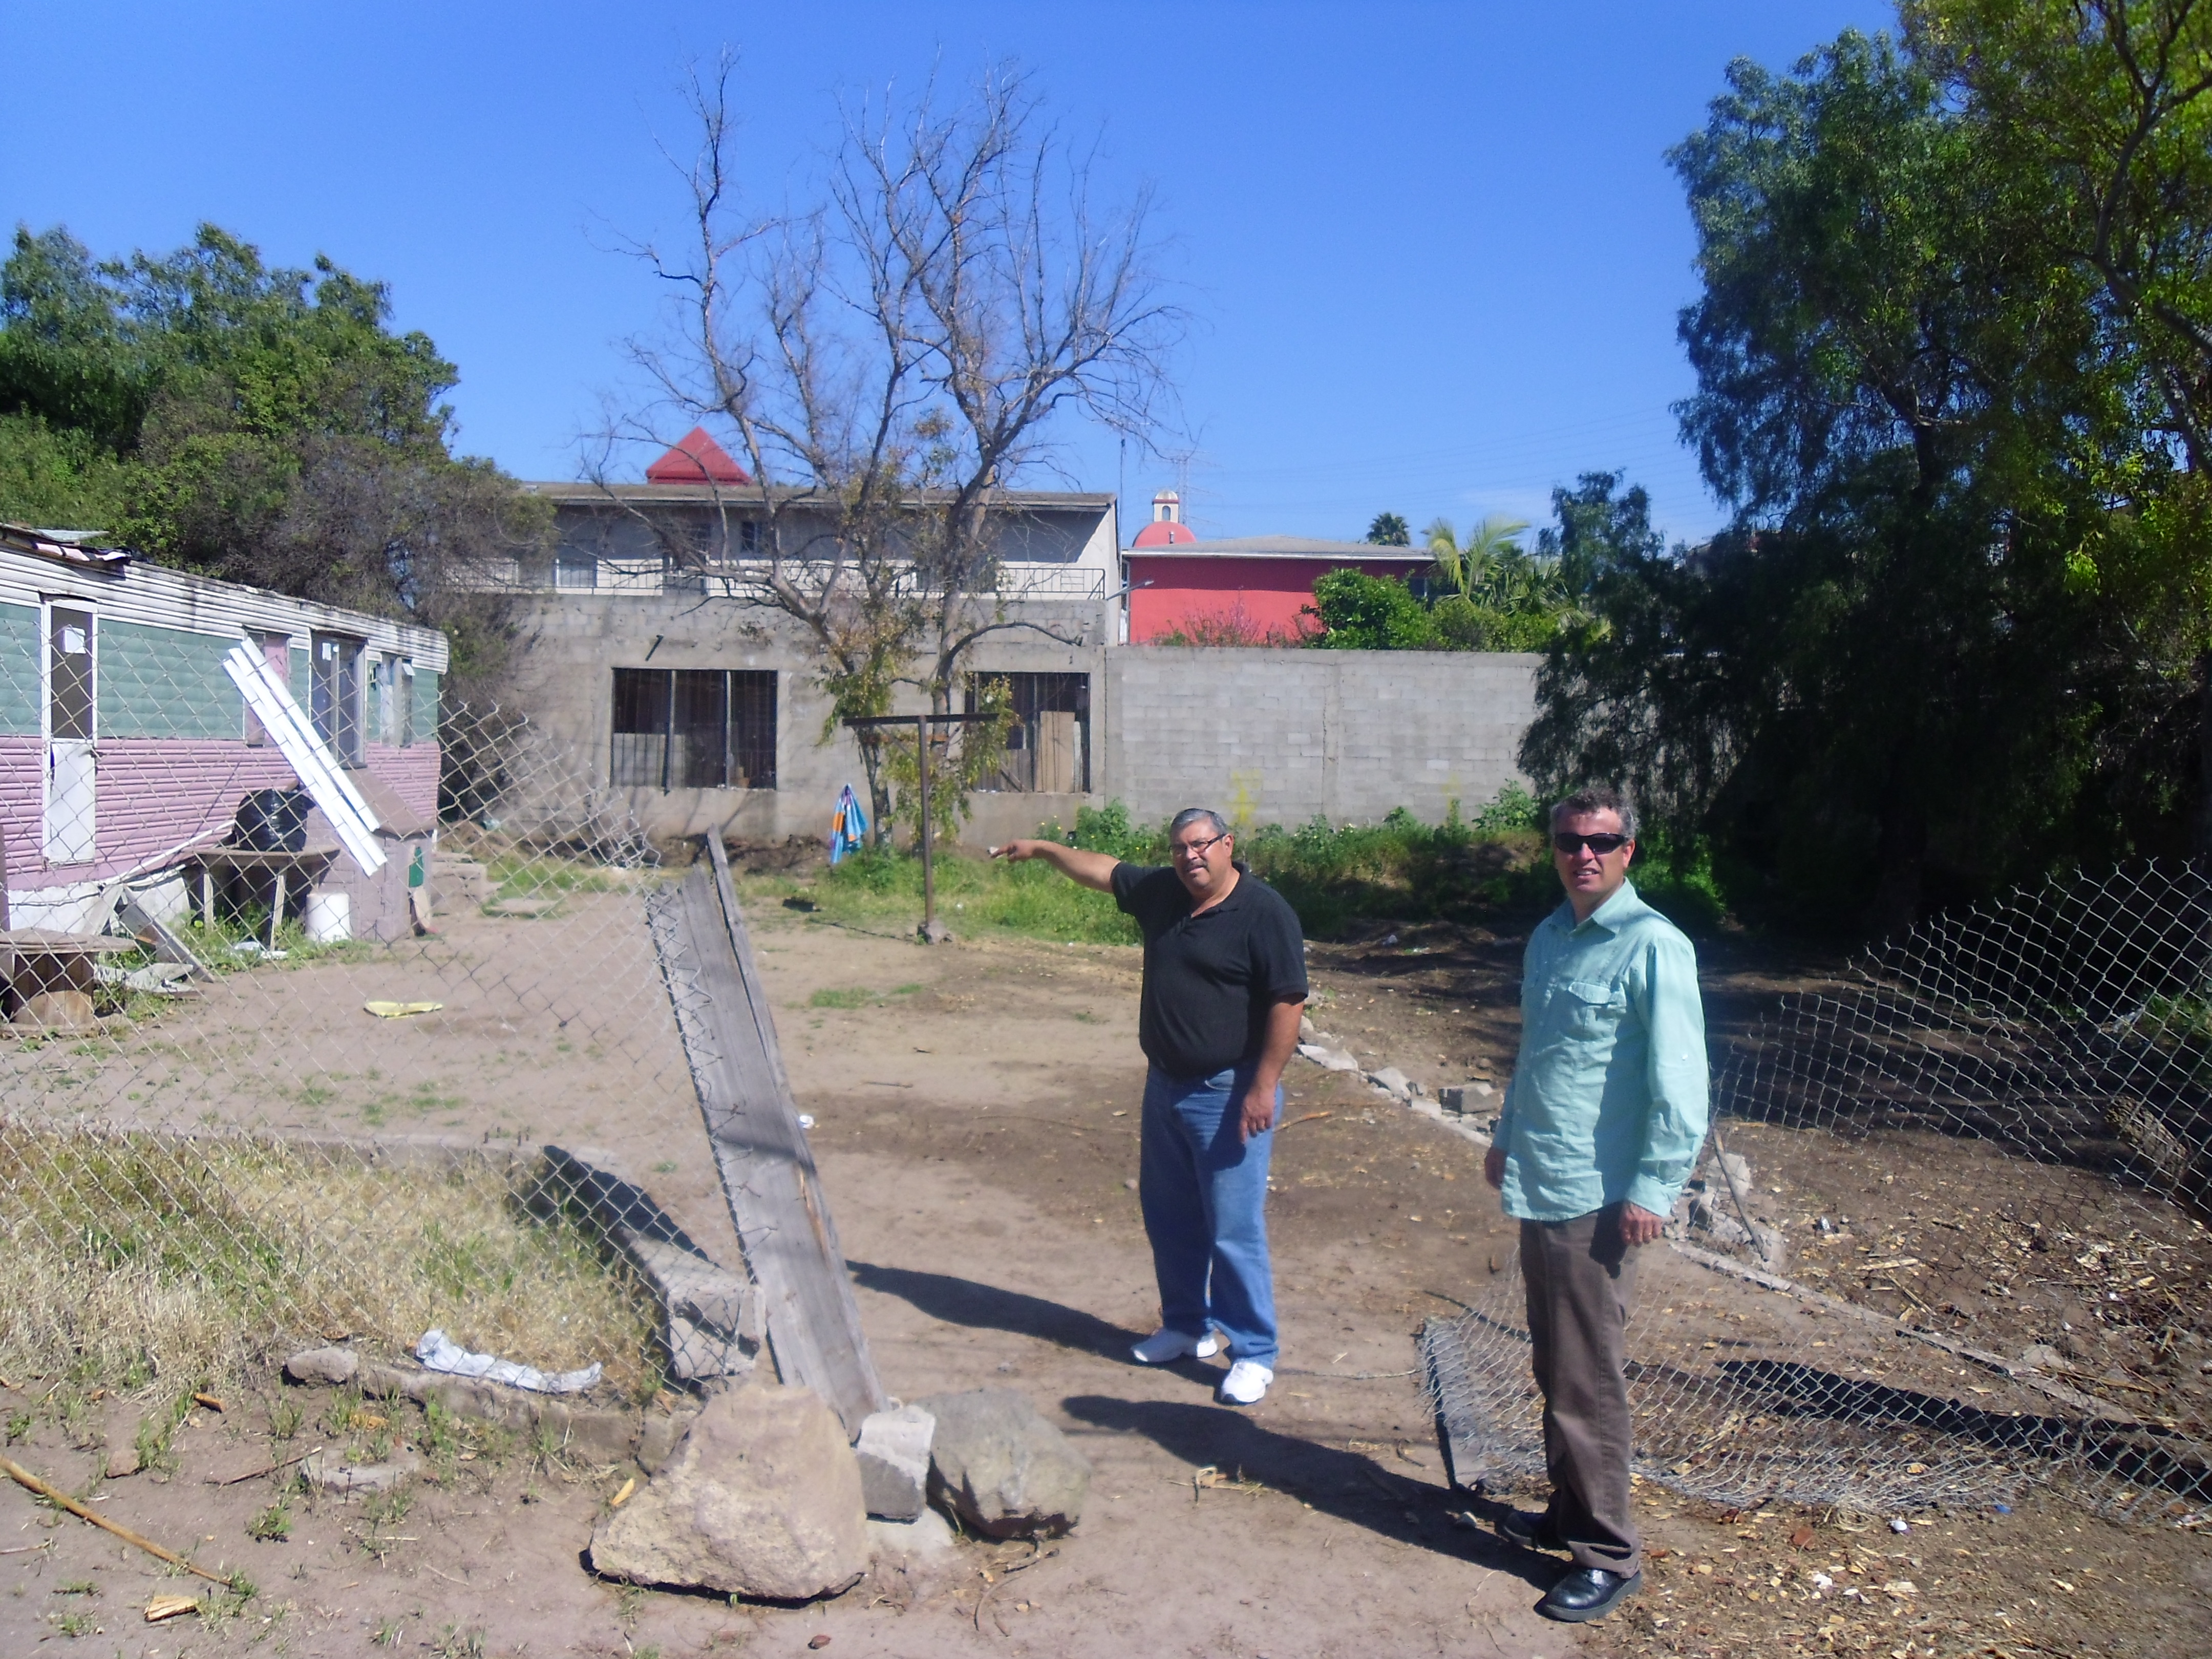 Ray & Daniel on the land where the church will be built with Harbor